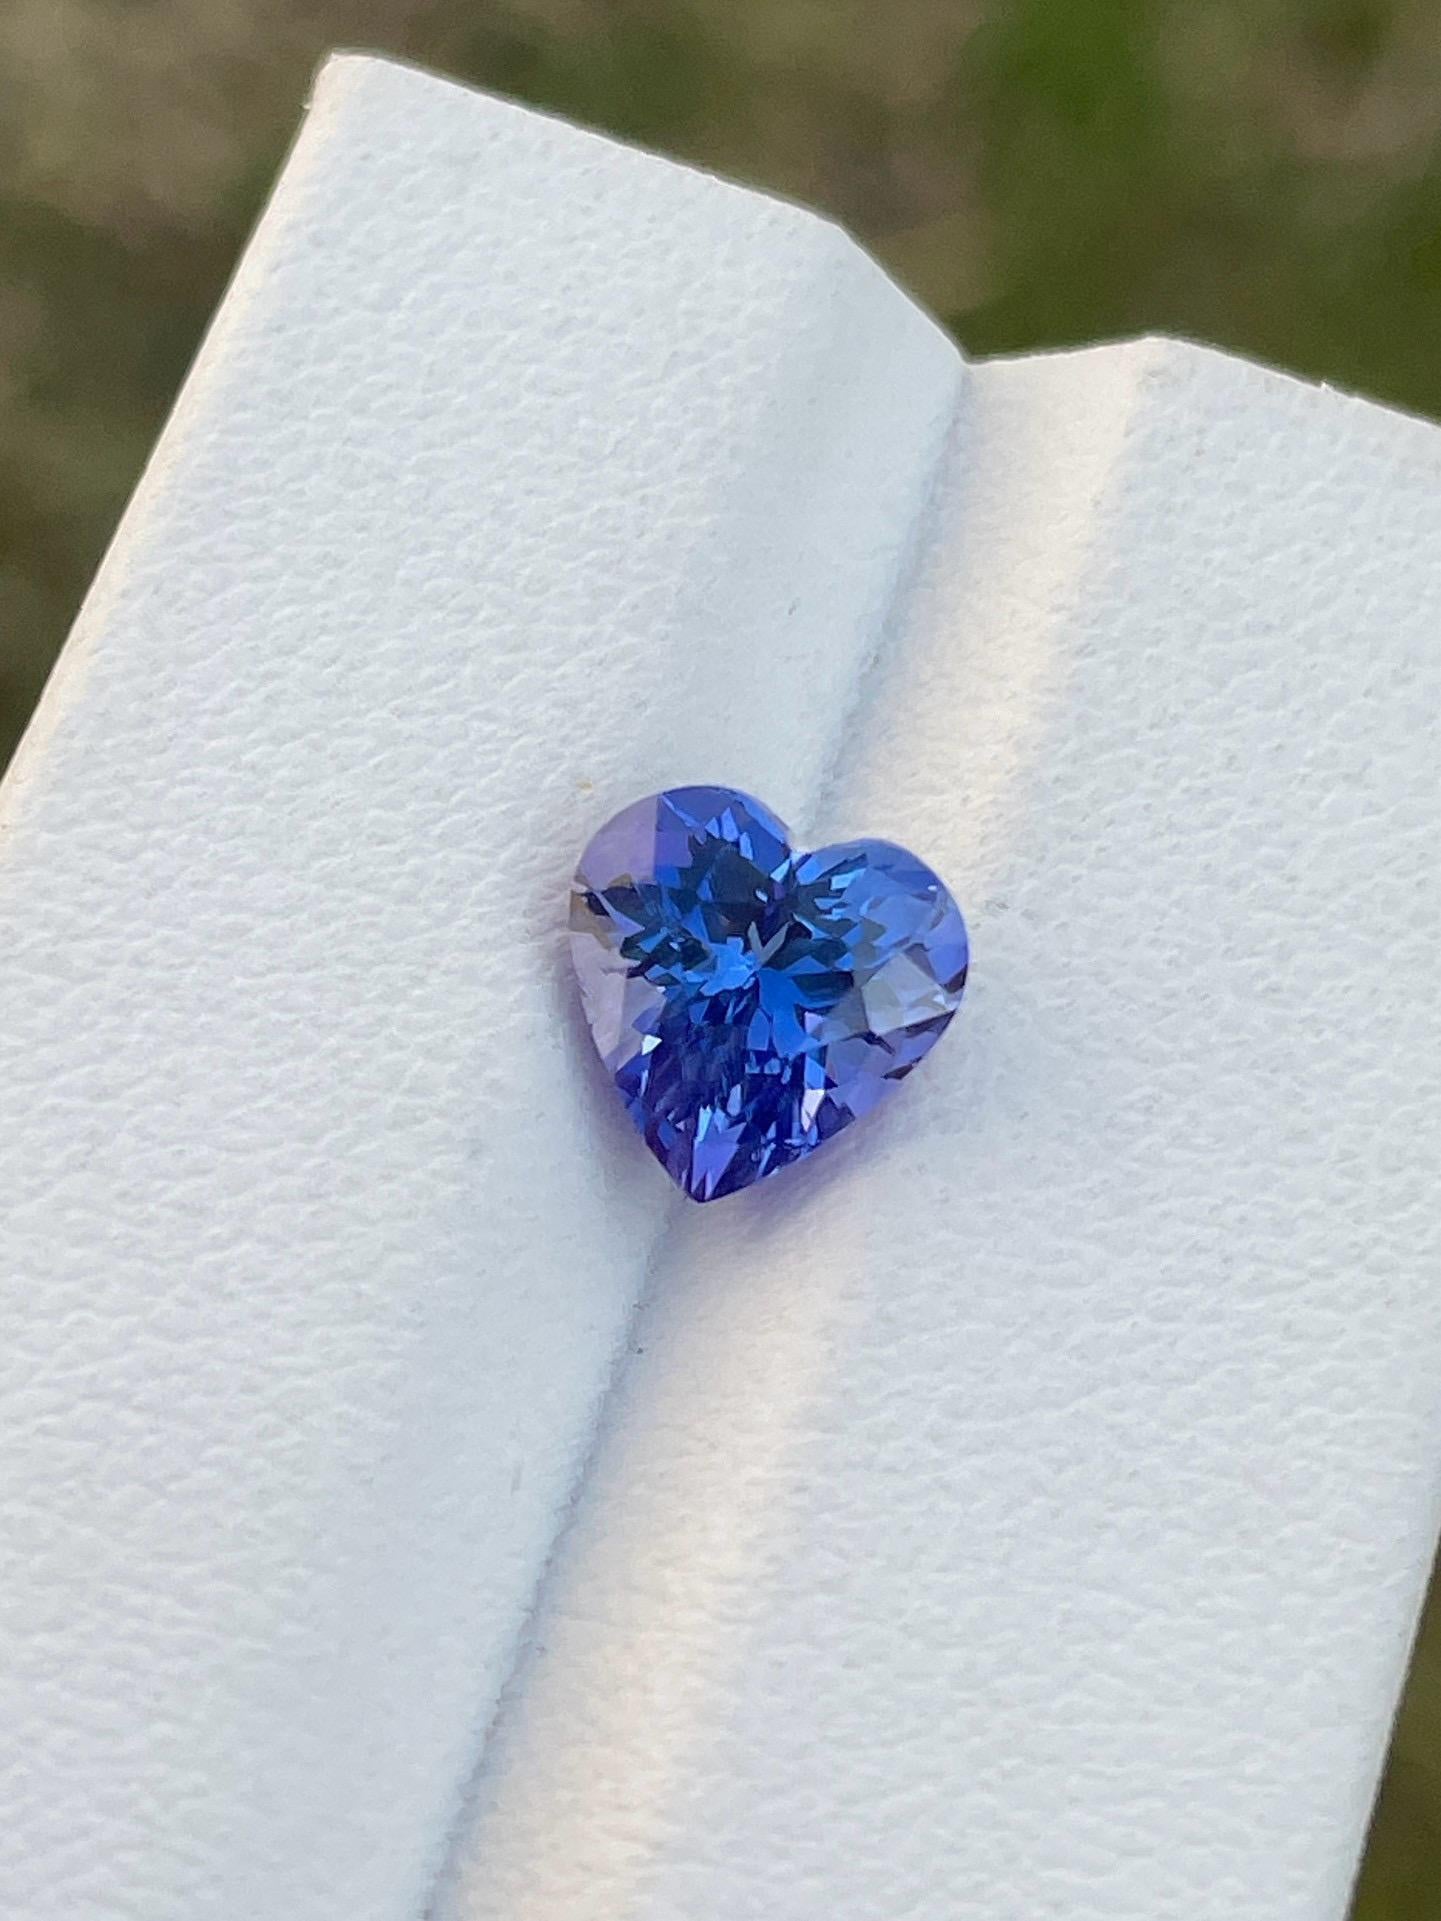 Tanzanite rich blue color of Tanzania perfect cut heart shape has a beautiful sparkle

TZA140
Weight 2.46 carats
Size 8.4mm
Rich blue color
Loop clean